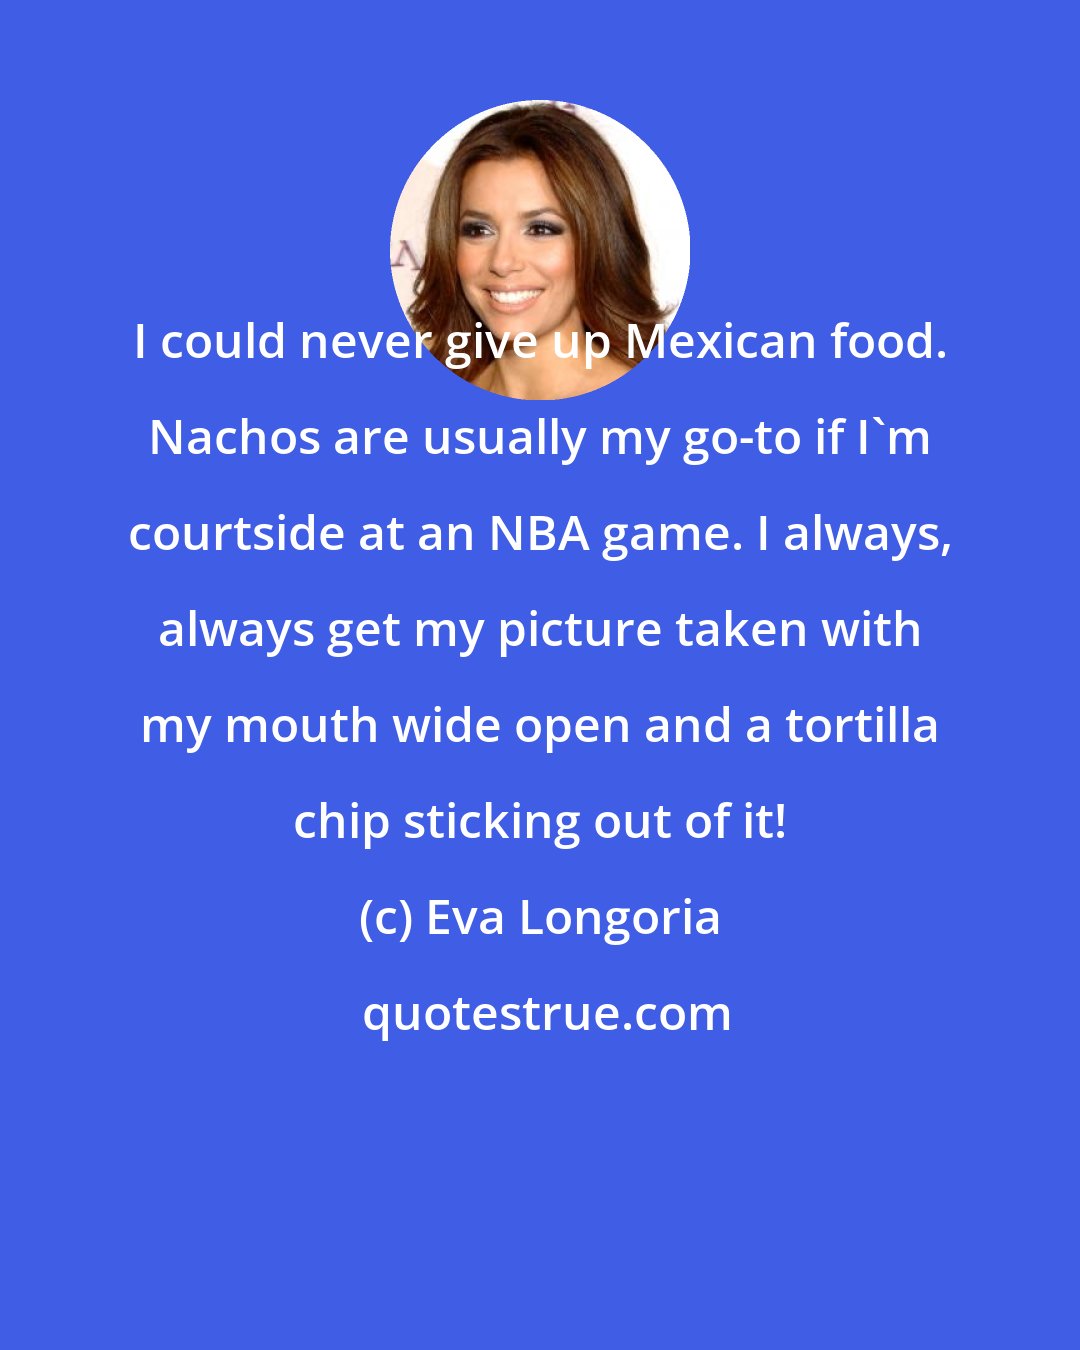 Eva Longoria: I could never give up Mexican food. Nachos are usually my go-to if I'm courtside at an NBA game. I always, always get my picture taken with my mouth wide open and a tortilla chip sticking out of it!